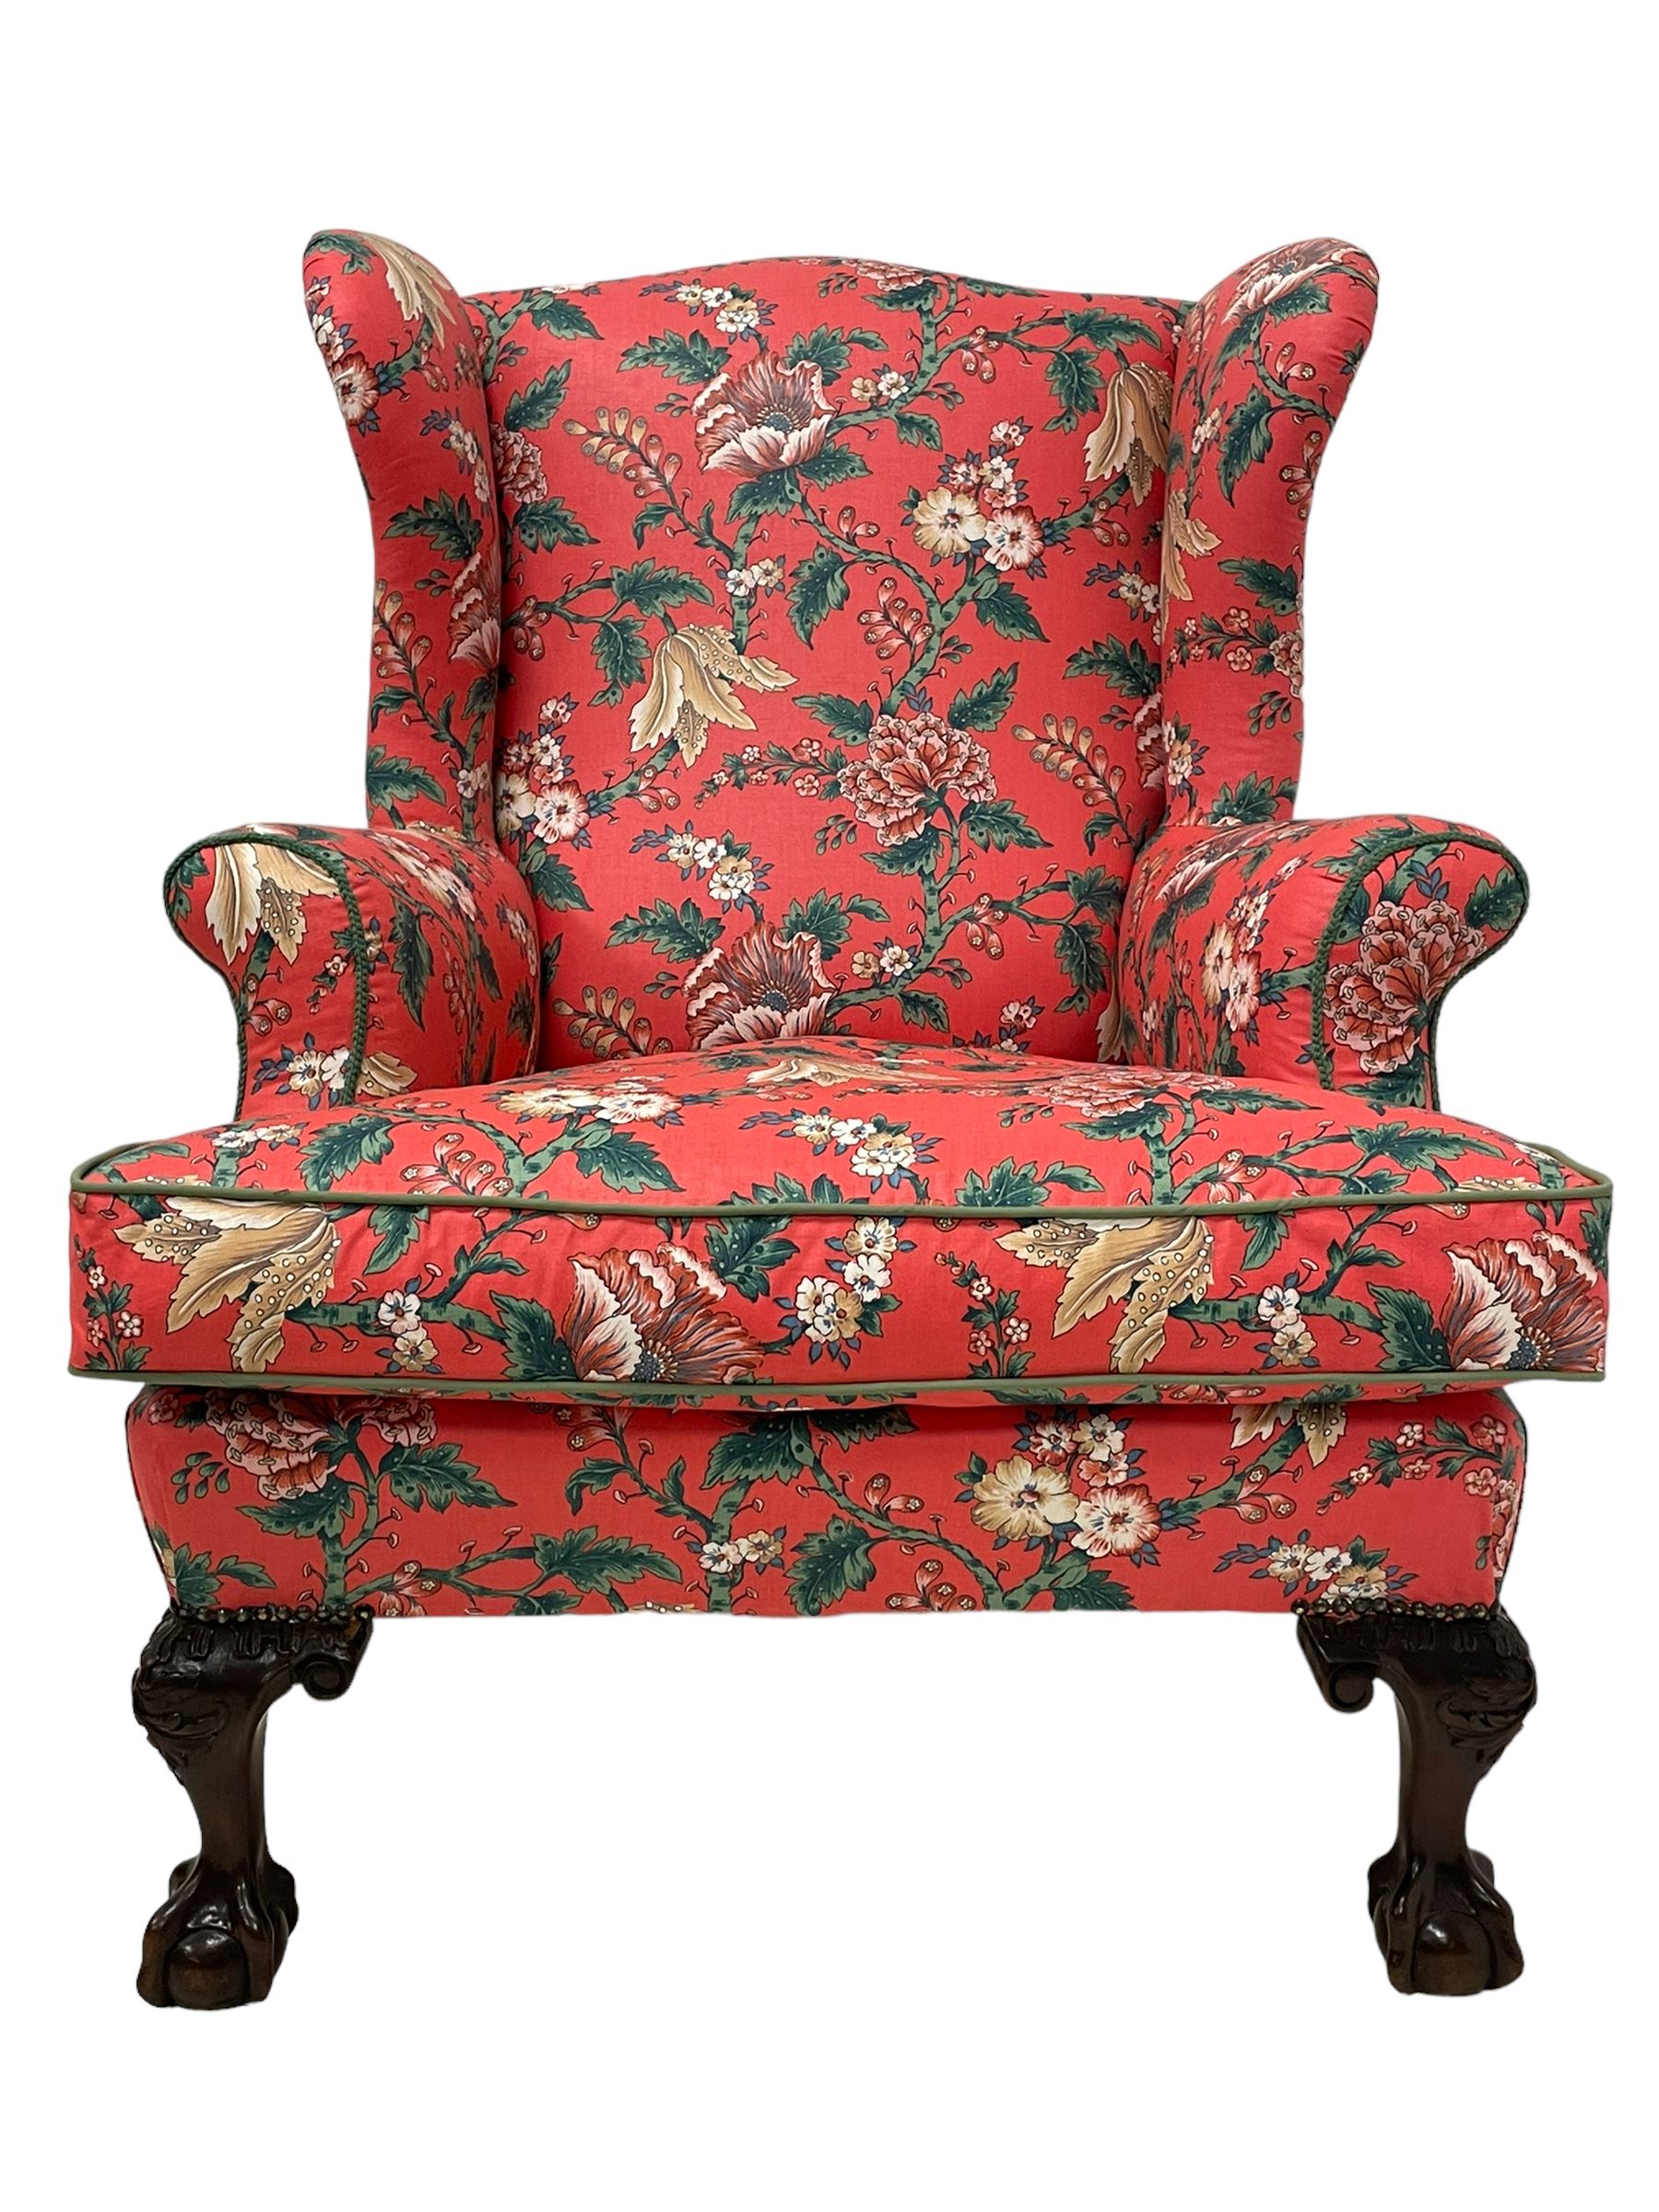 Late 19th to early 20th century wingback armchair - Image 8 of 9